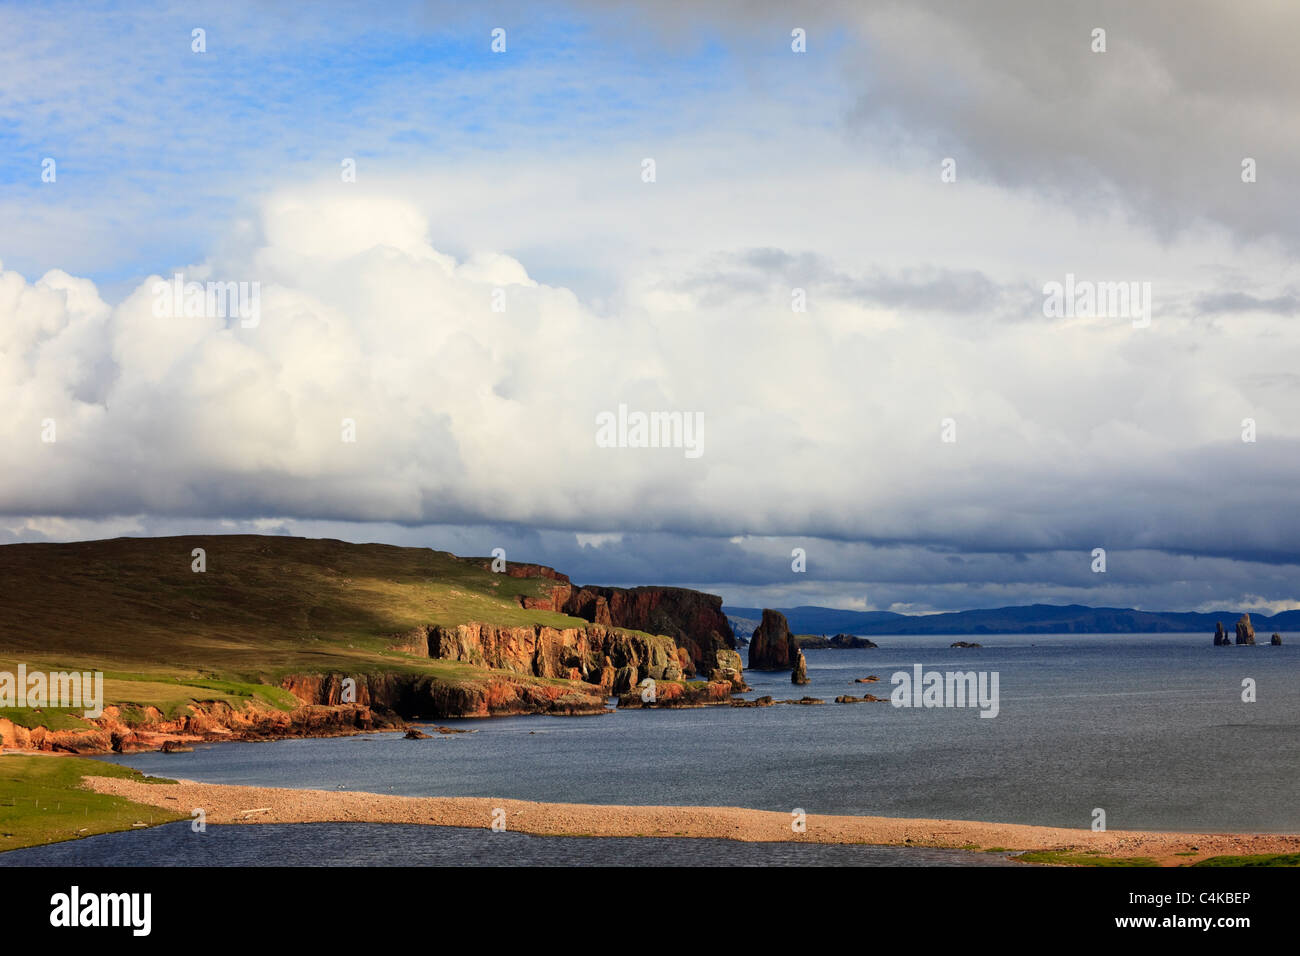 Coastal landscape of view across Braewick bay to The Neap cliffs and Drongs red sandstone sea stacks. Eshaness, Shetland Islands, Scotland, UK. Stock Photo